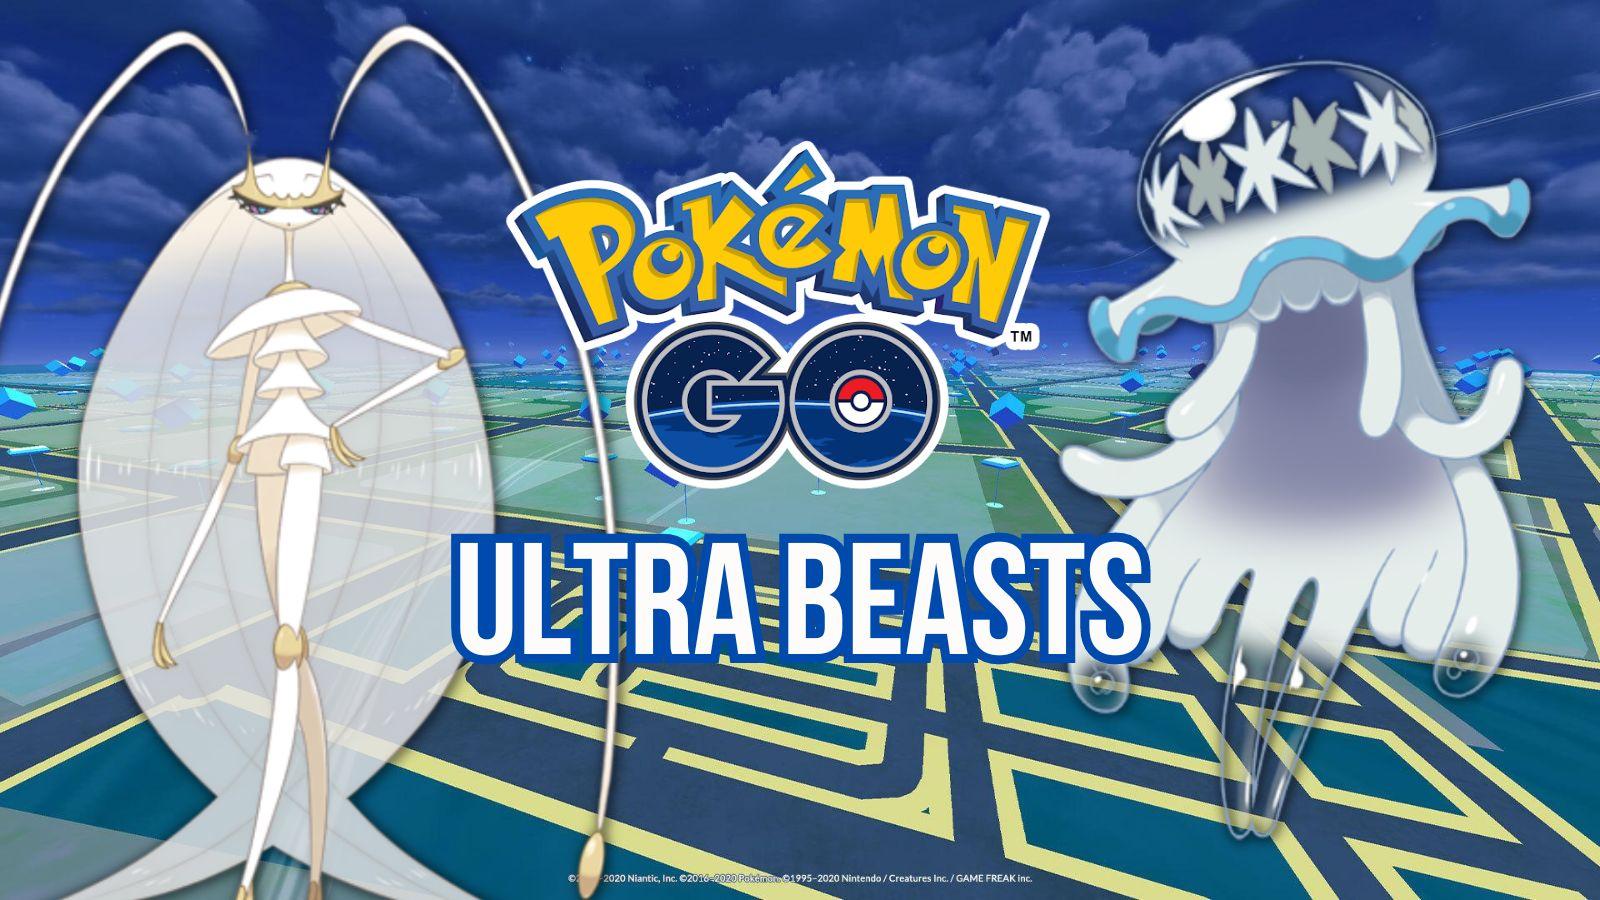 Pokemon Go Available Ultra Beasts, List of Upcoming Ultra Beasts